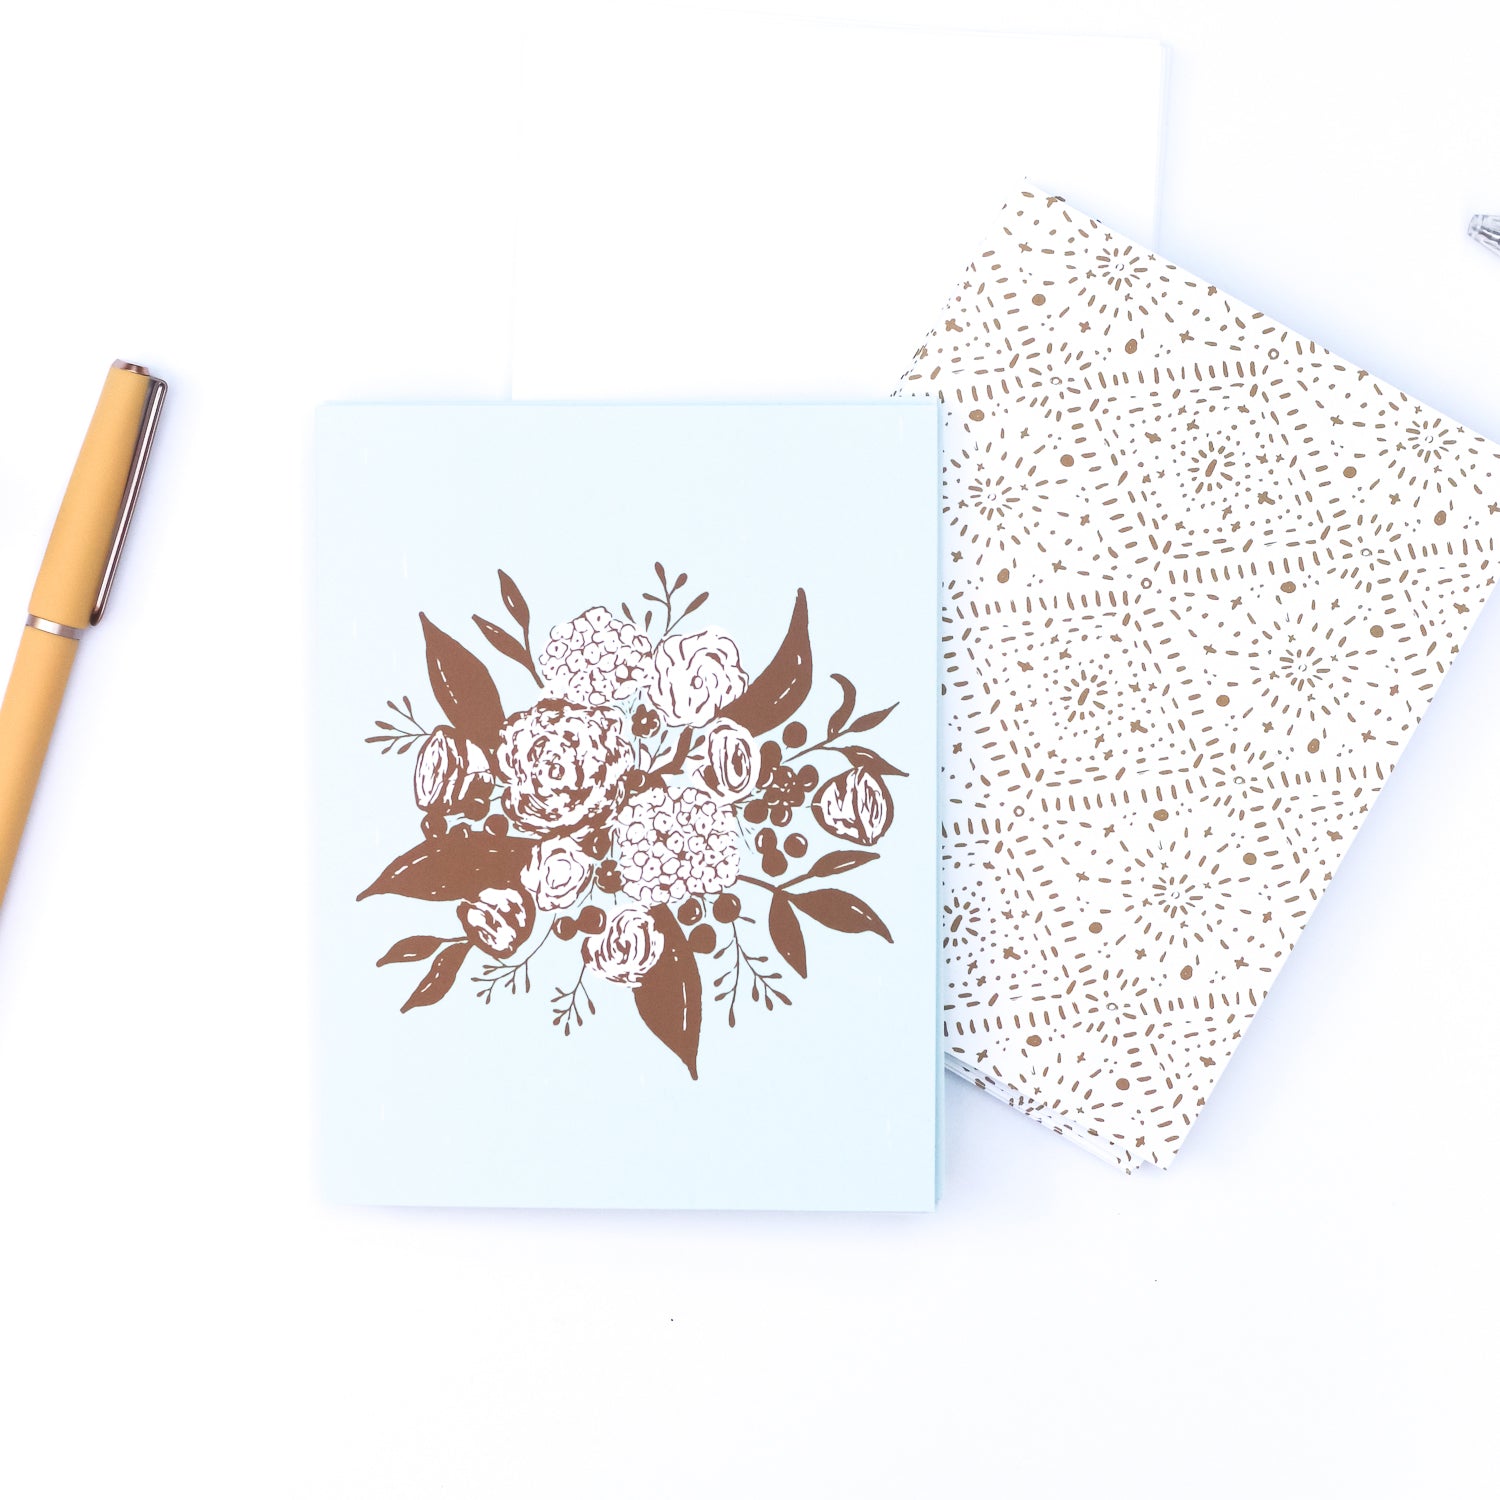 eco-friendly recycled notecards | ocean & ochre bouquet | shop radiant home studio